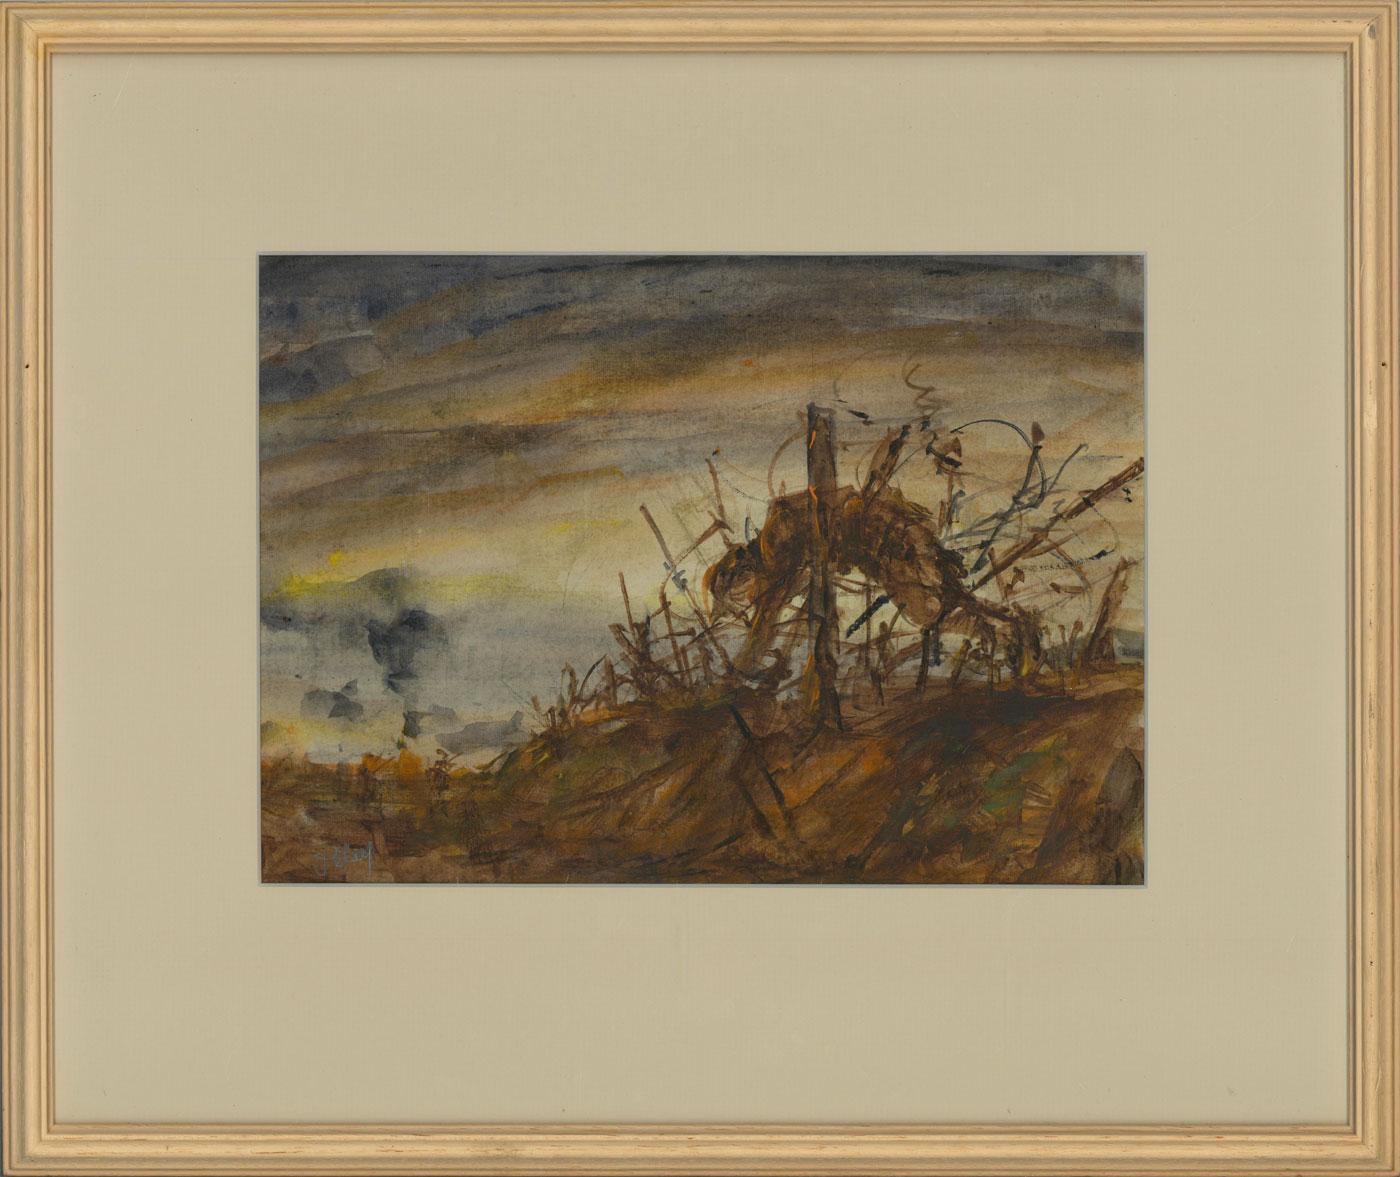 A devastating and arresting battlefield composition by the British listed artist Ronald Olley (b.1926). A barbed wire fence marks a boundary on disputed territory, with the suspended corpse of a soldier providing the central focus. Olley used his